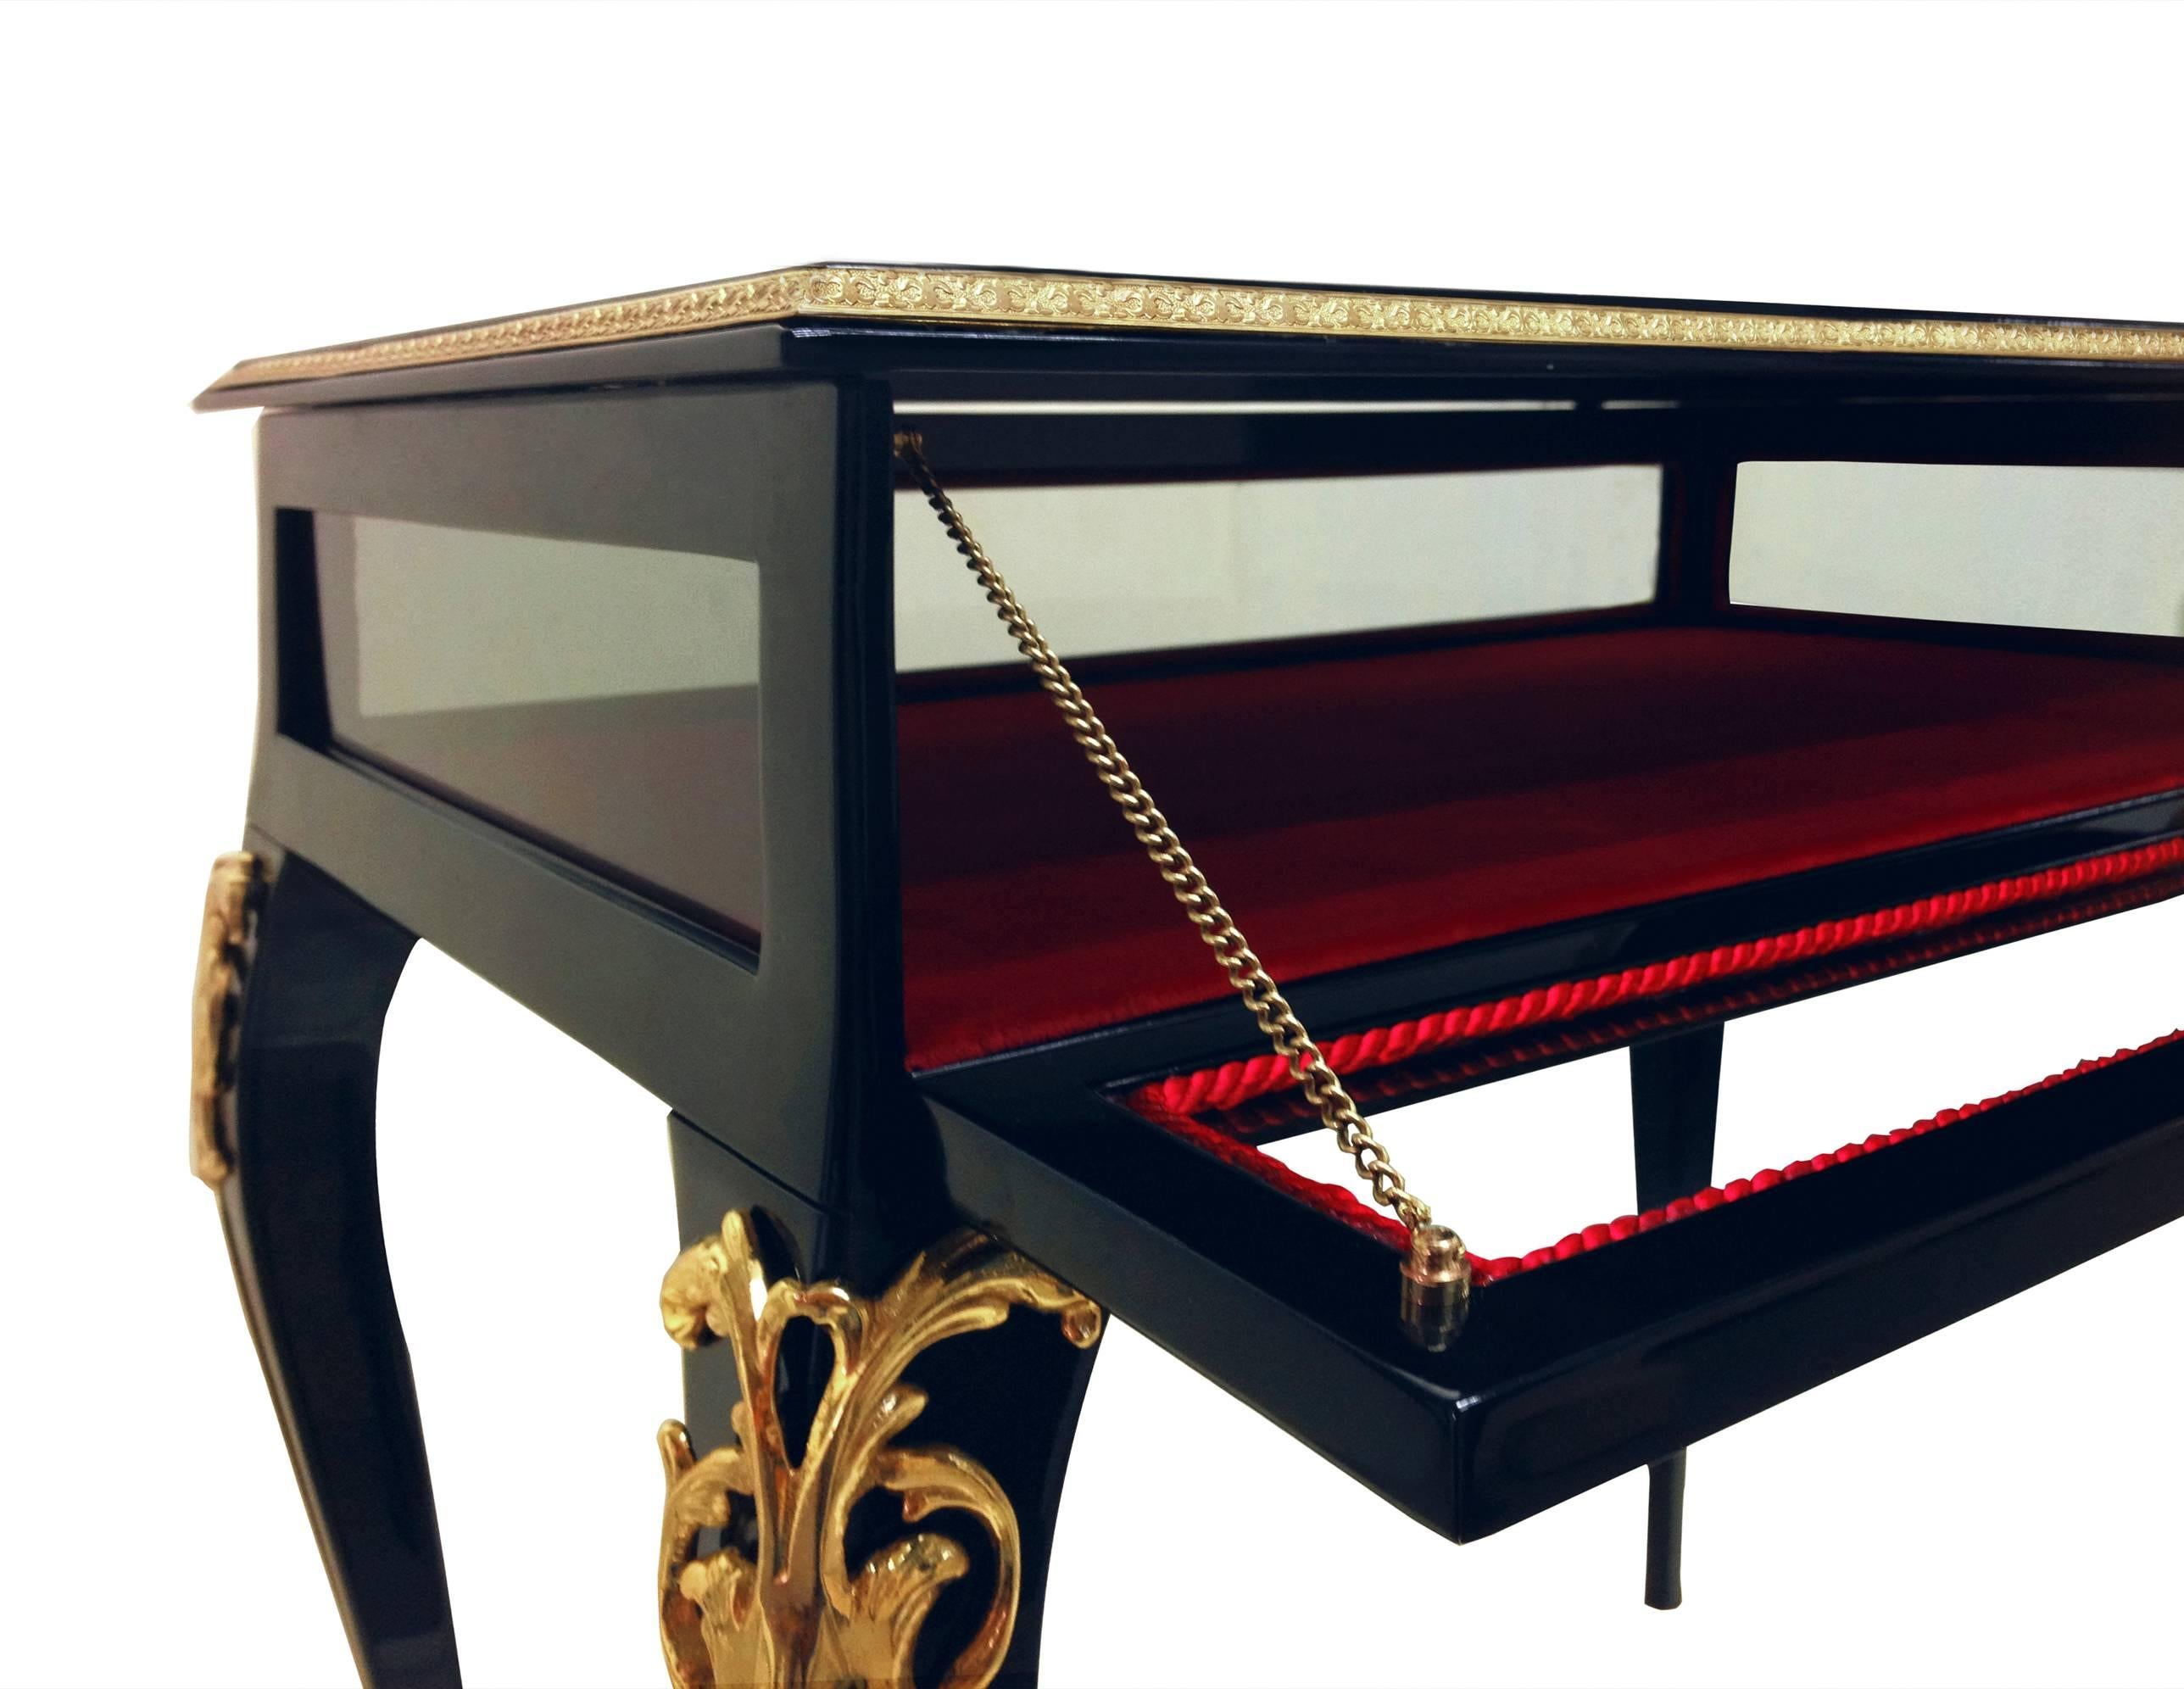 Rococo 18th Century Inspired Black Lacquer and Gold Cabriole Bedside Table by Koket For Sale